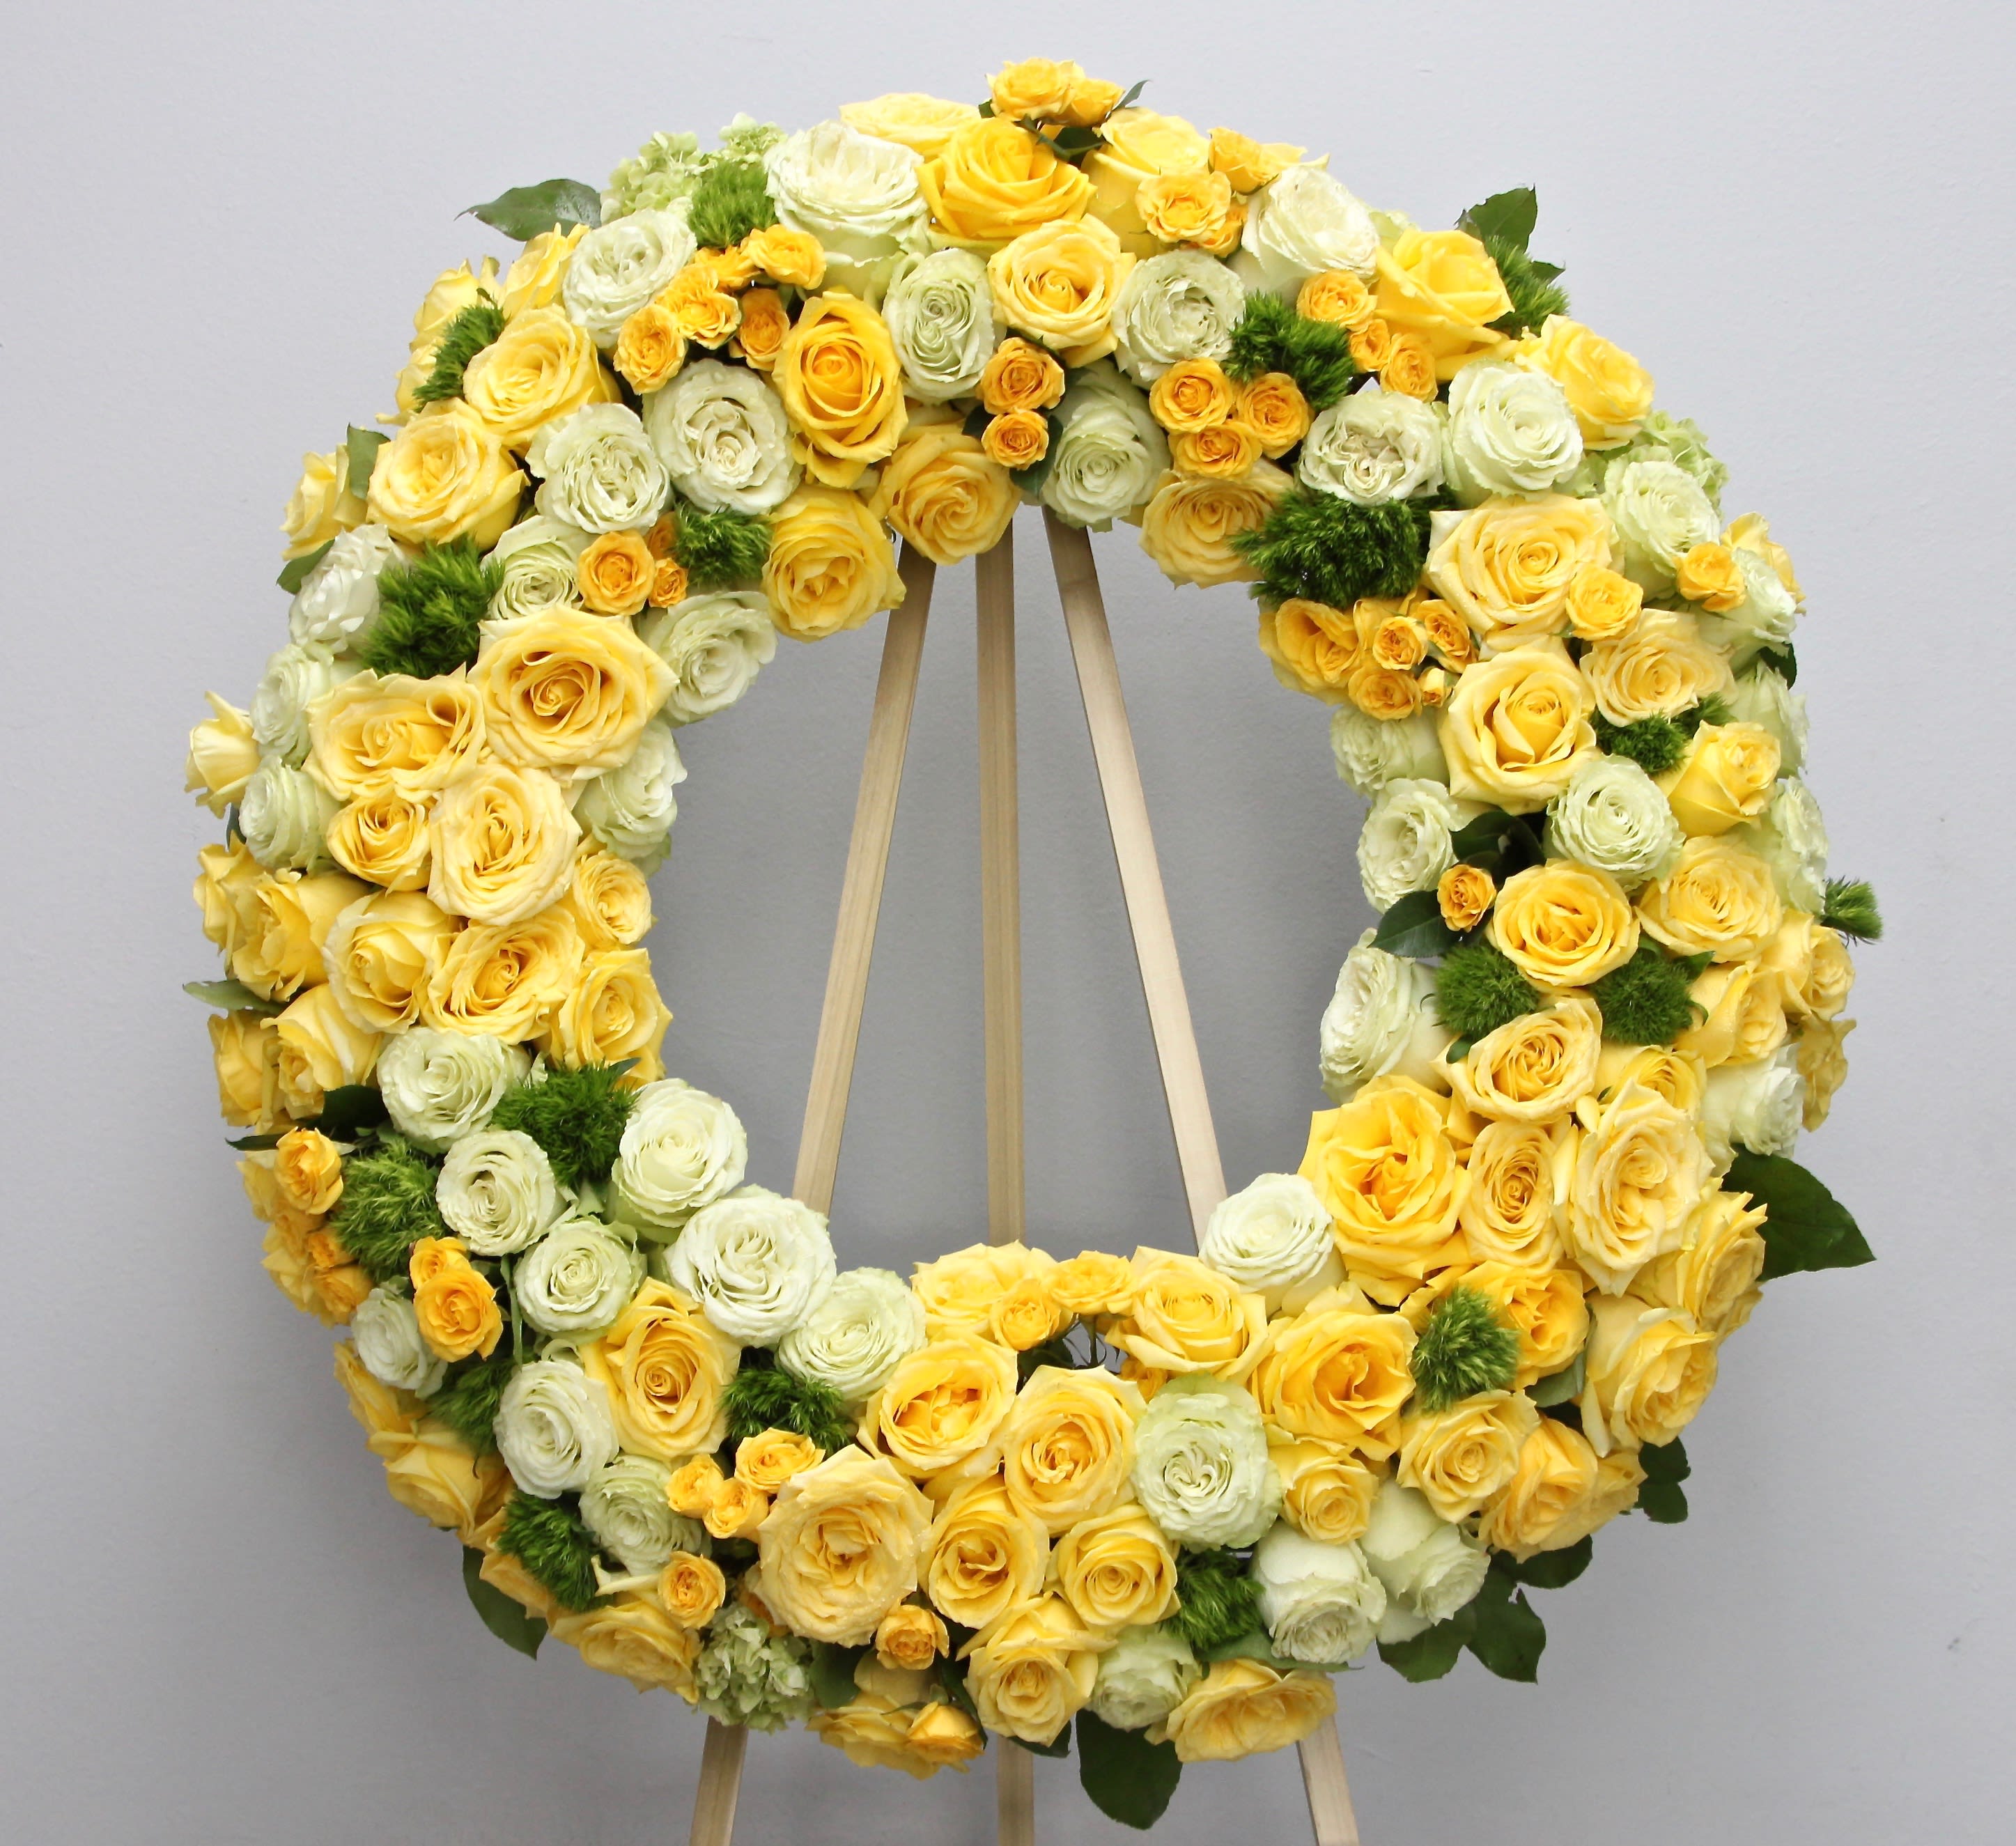 Sunshine Wreath  - This sympathy spray includes bright yellow roses, hydrangeas, and fluffy seasonal greens.   We include easel, printed banner and delivery (some fees may apply).  Standard size is 30'', deluxe is 36'', and premium is 42''.